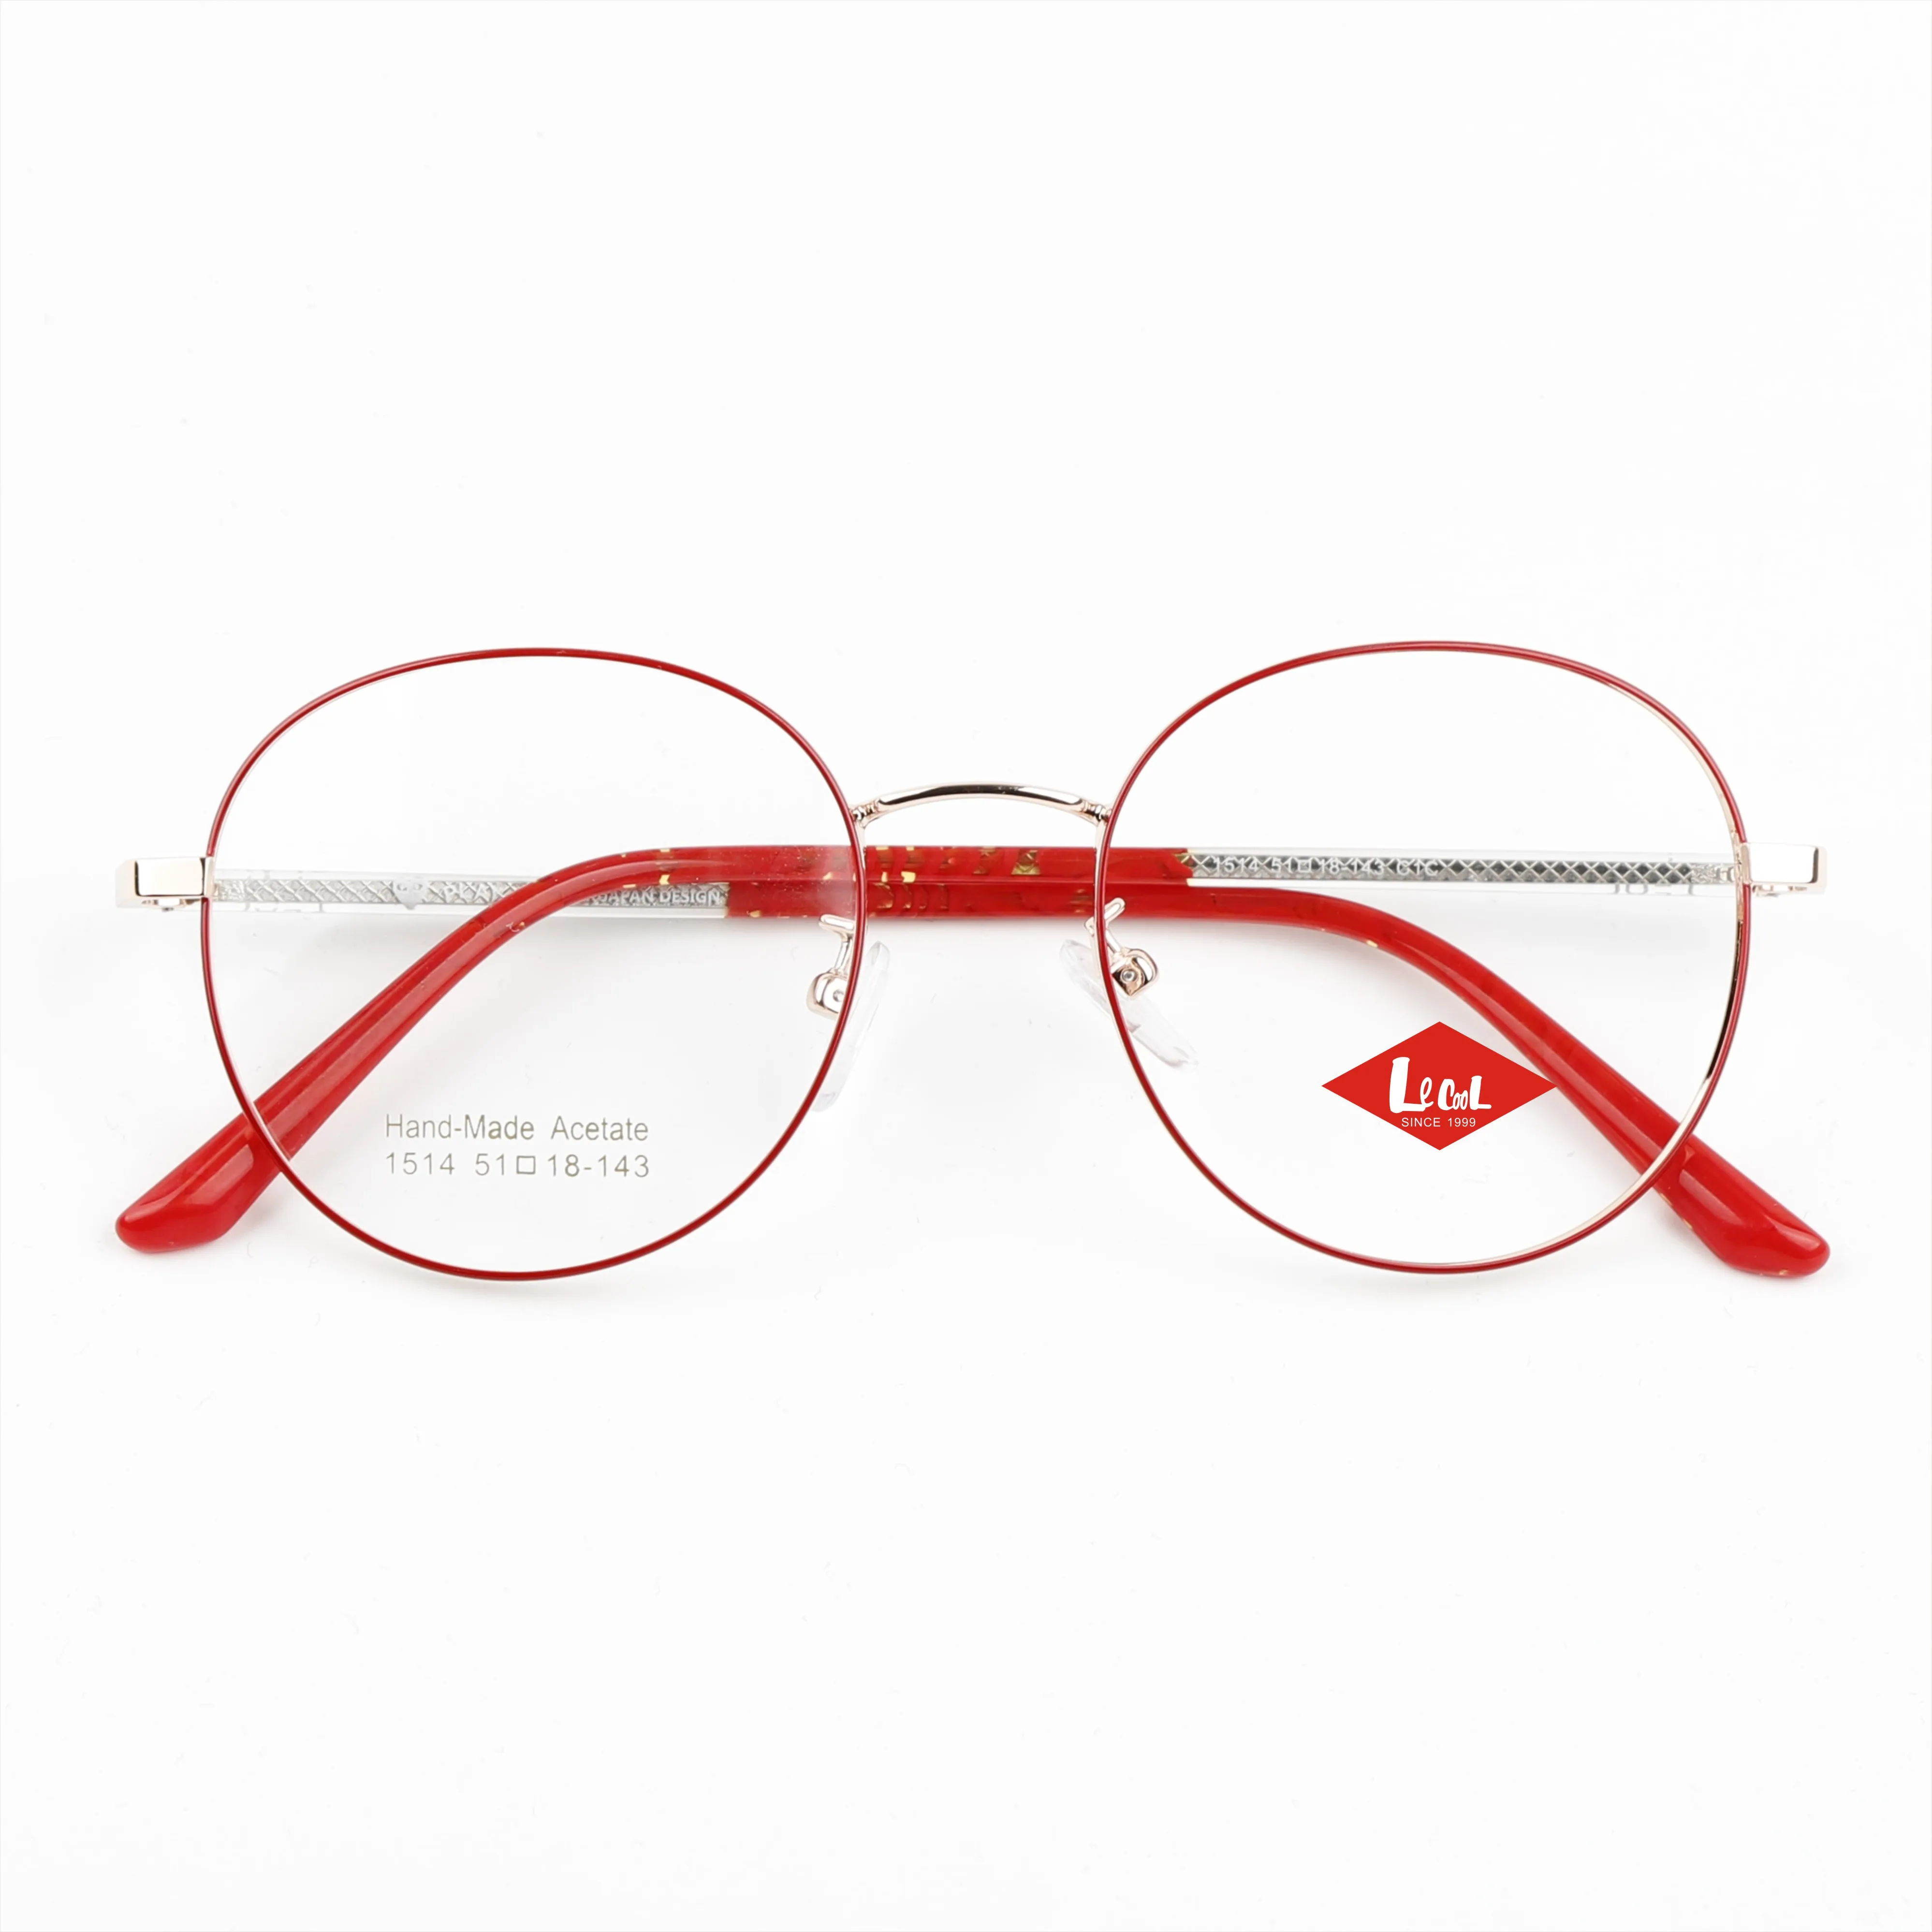 

New High Quality Branded Red Round Spectacle Clear Eyewear Optical Anti Blue Ray Reading Glasses Nerds Specs Frame Oem Guangzhou